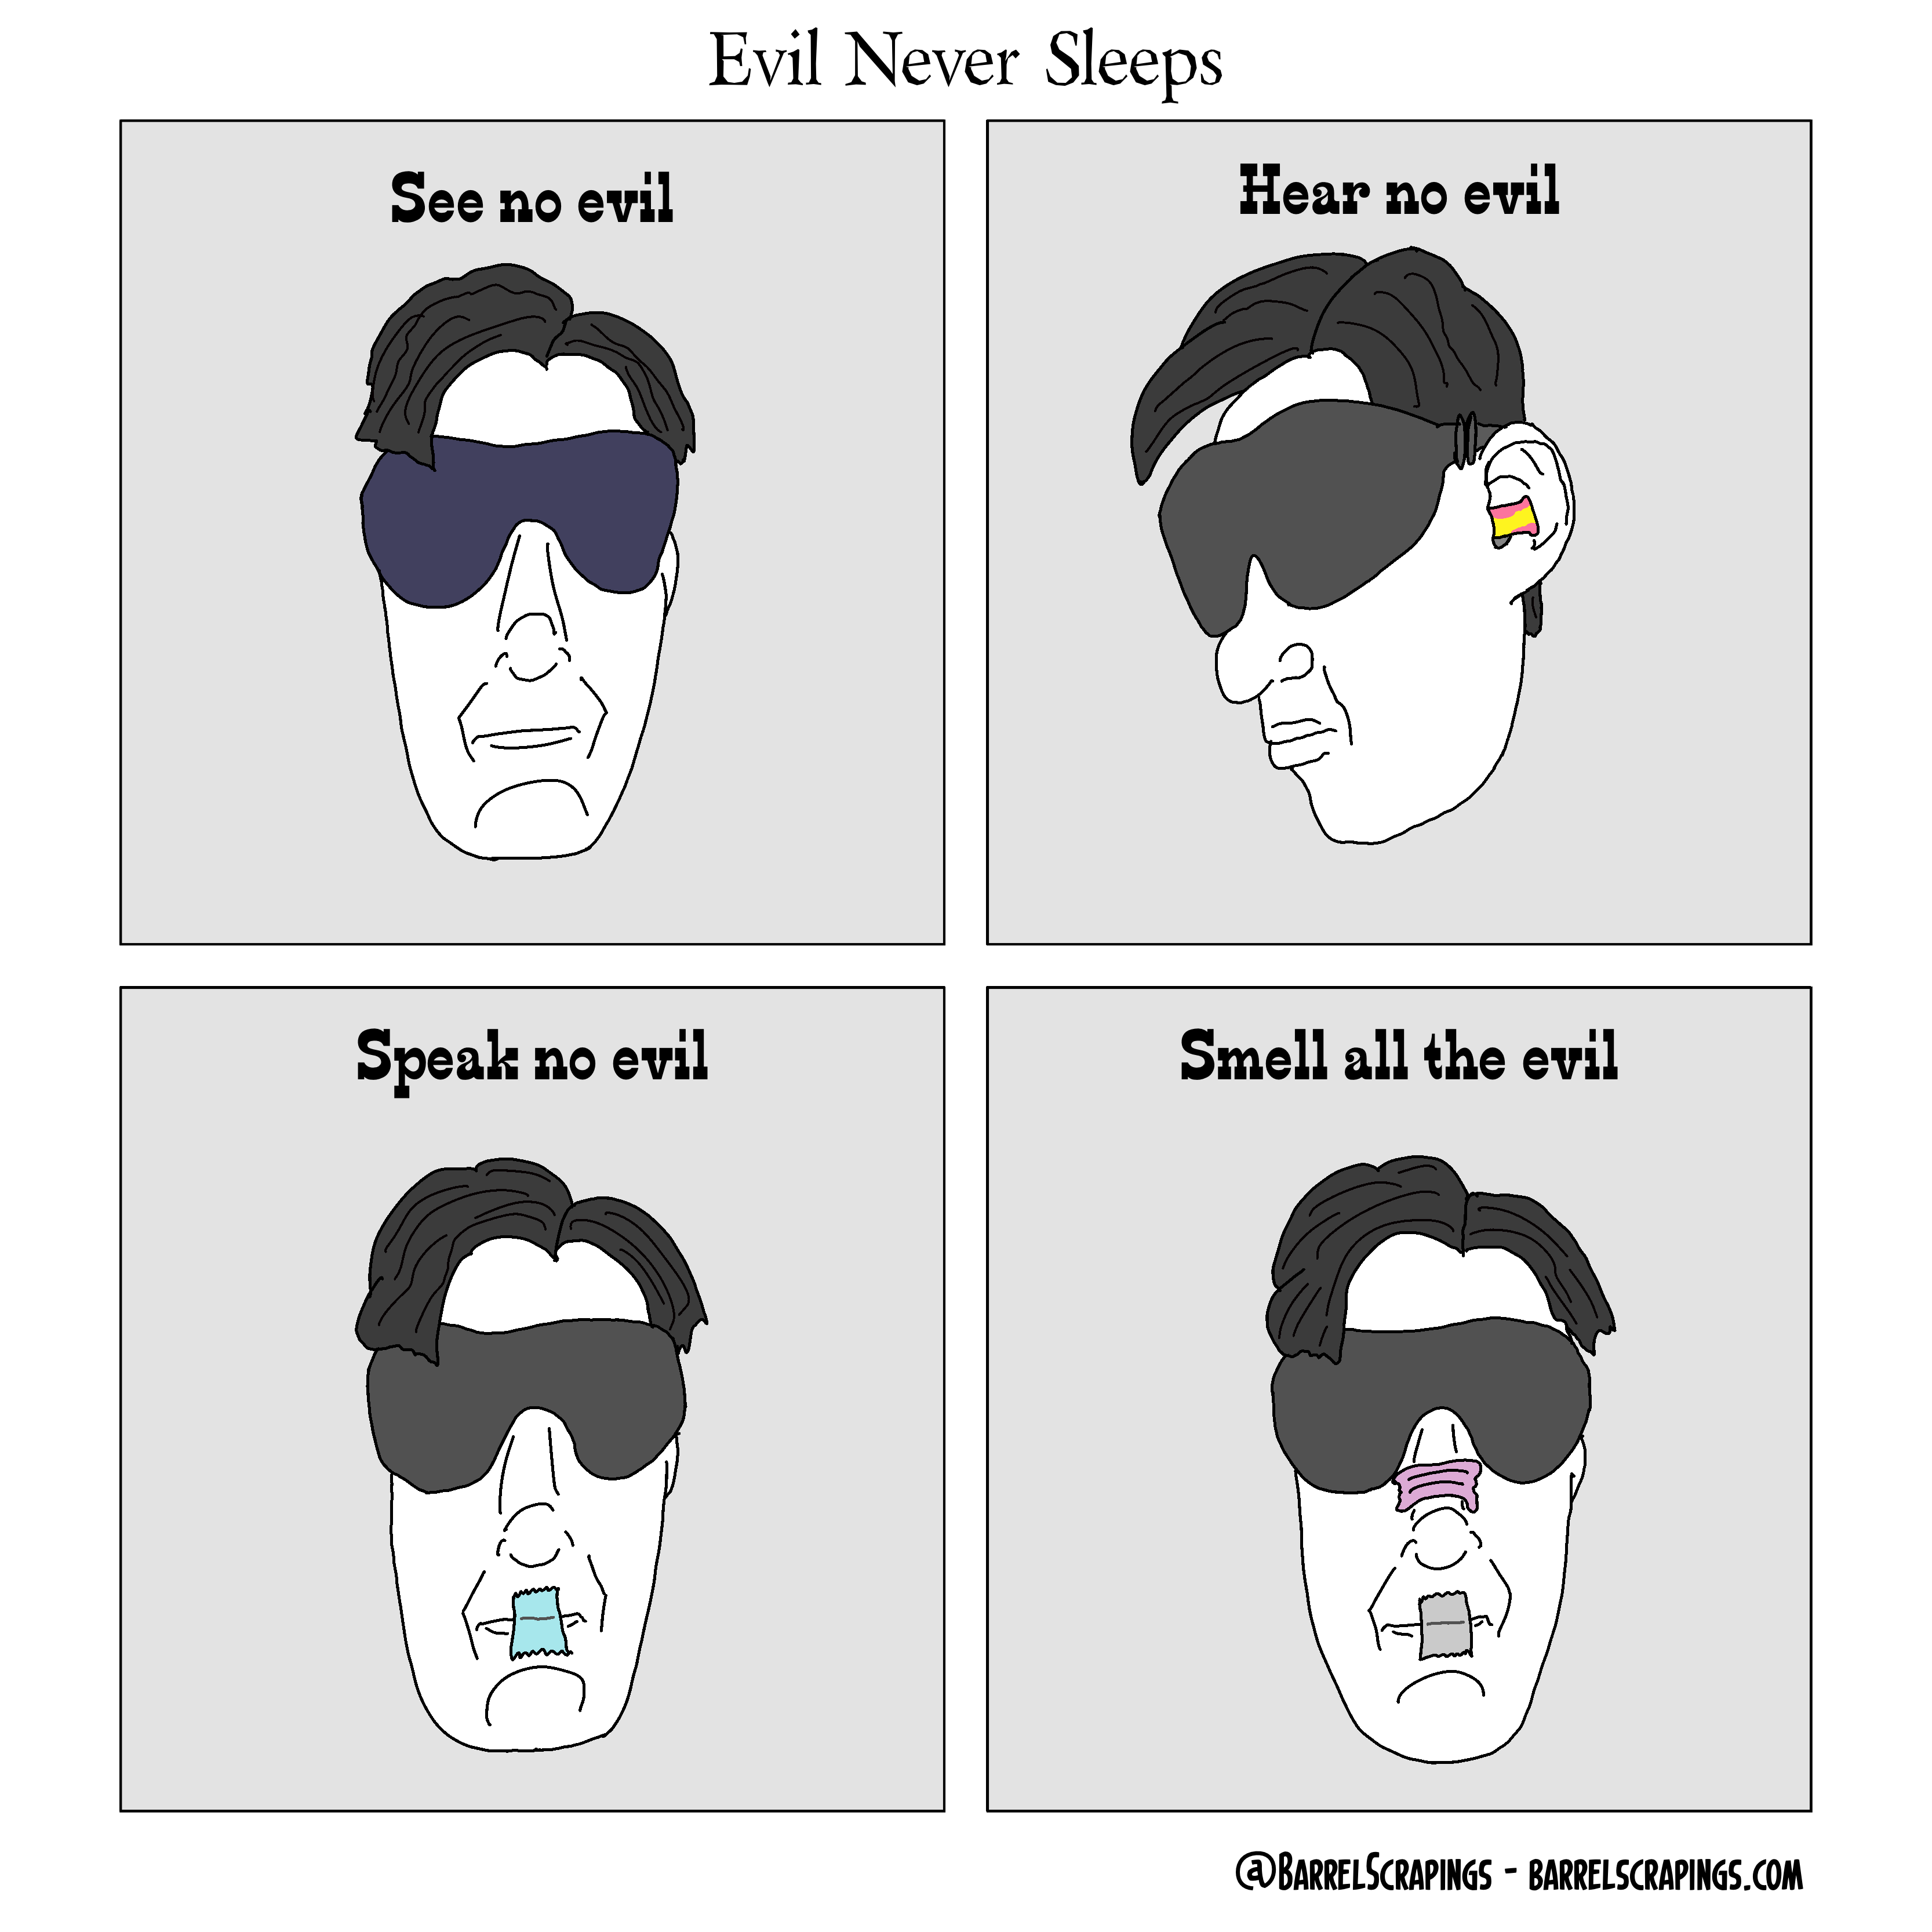 Four panels. Panel 1: Man with eye mask on. "See no evil." Panel 2: Same man, head tilted, ear plugs in. "Hear no evil". Panel 3: Tape covering same man's mouth. "Speak no evil". Panel 4: Nose strip visible. "Smell all the evil"